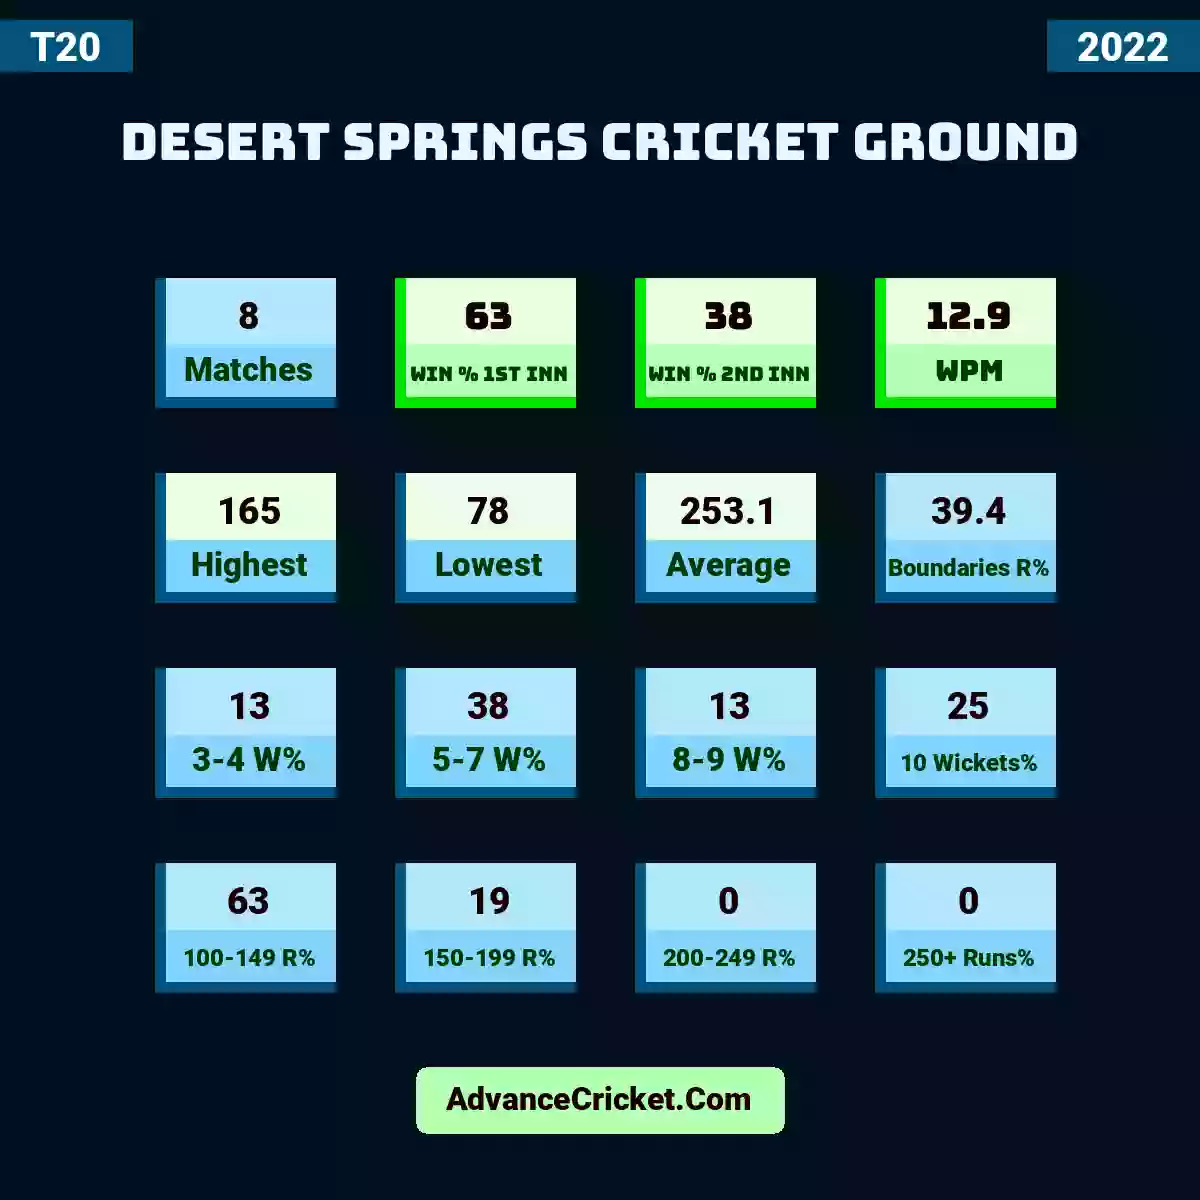 Image showing Desert Springs Cricket Ground with Matches: 8, Win % 1st Inn: 63, Win % 2nd Inn: 38, WPM: 12.9, Highest: 165, Lowest: 78, Average: 253.1, Boundaries R%: 39.4, 3-4 W%: 13, 5-7 W%: 38, 8-9 W%: 13, 10 Wickets%: 25, 100-149 R%: 63, 150-199 R%: 19, 200-249 R%: 0, 250+ Runs%: 0.